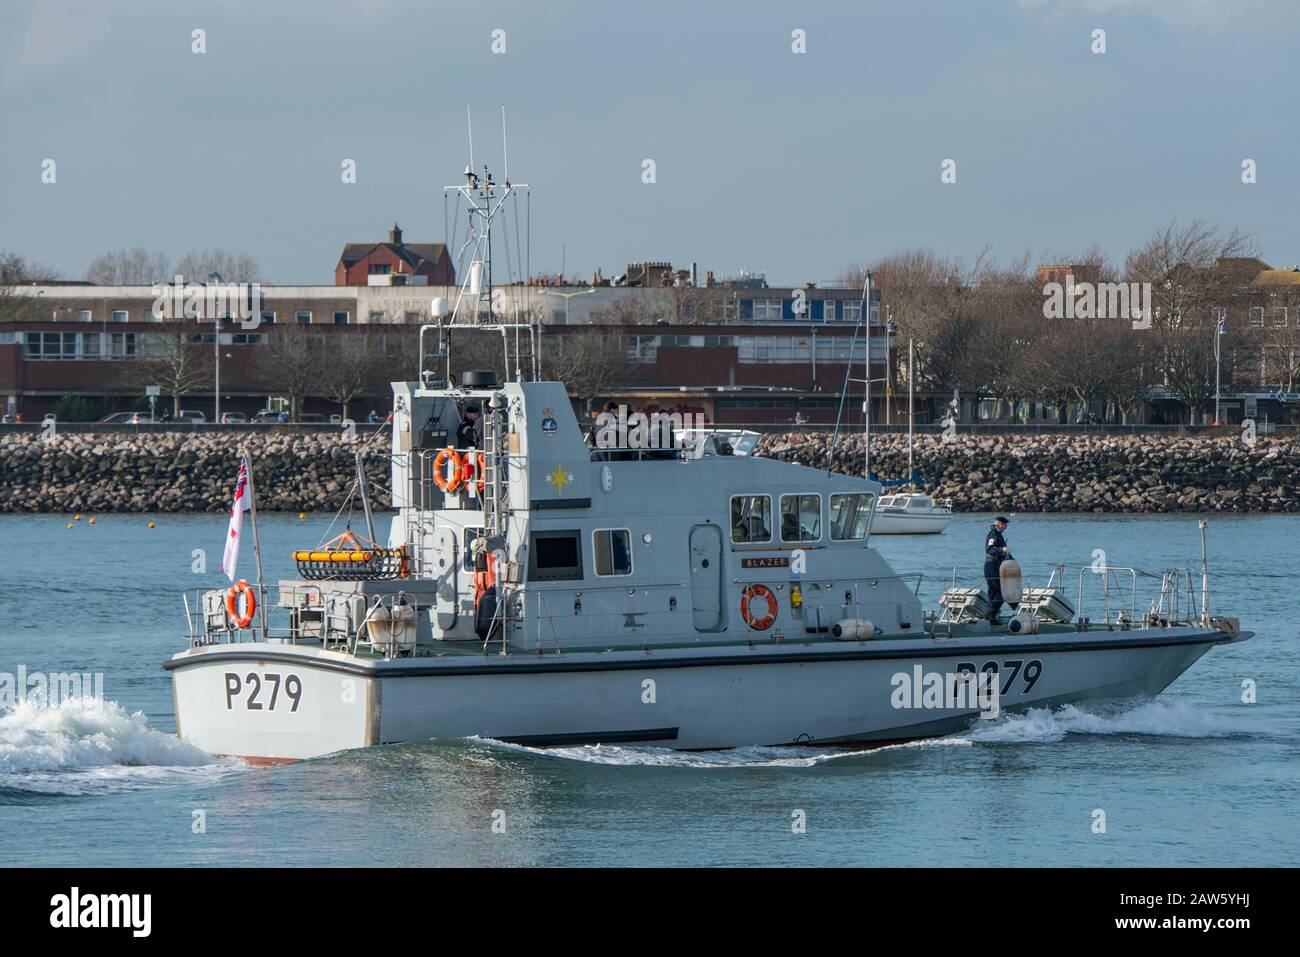 The Royal Navy Archer Class patrol boat HMS Blazer (P279) in Portsmouth Harbour, UK on the 5th February 2020. Stock Photo